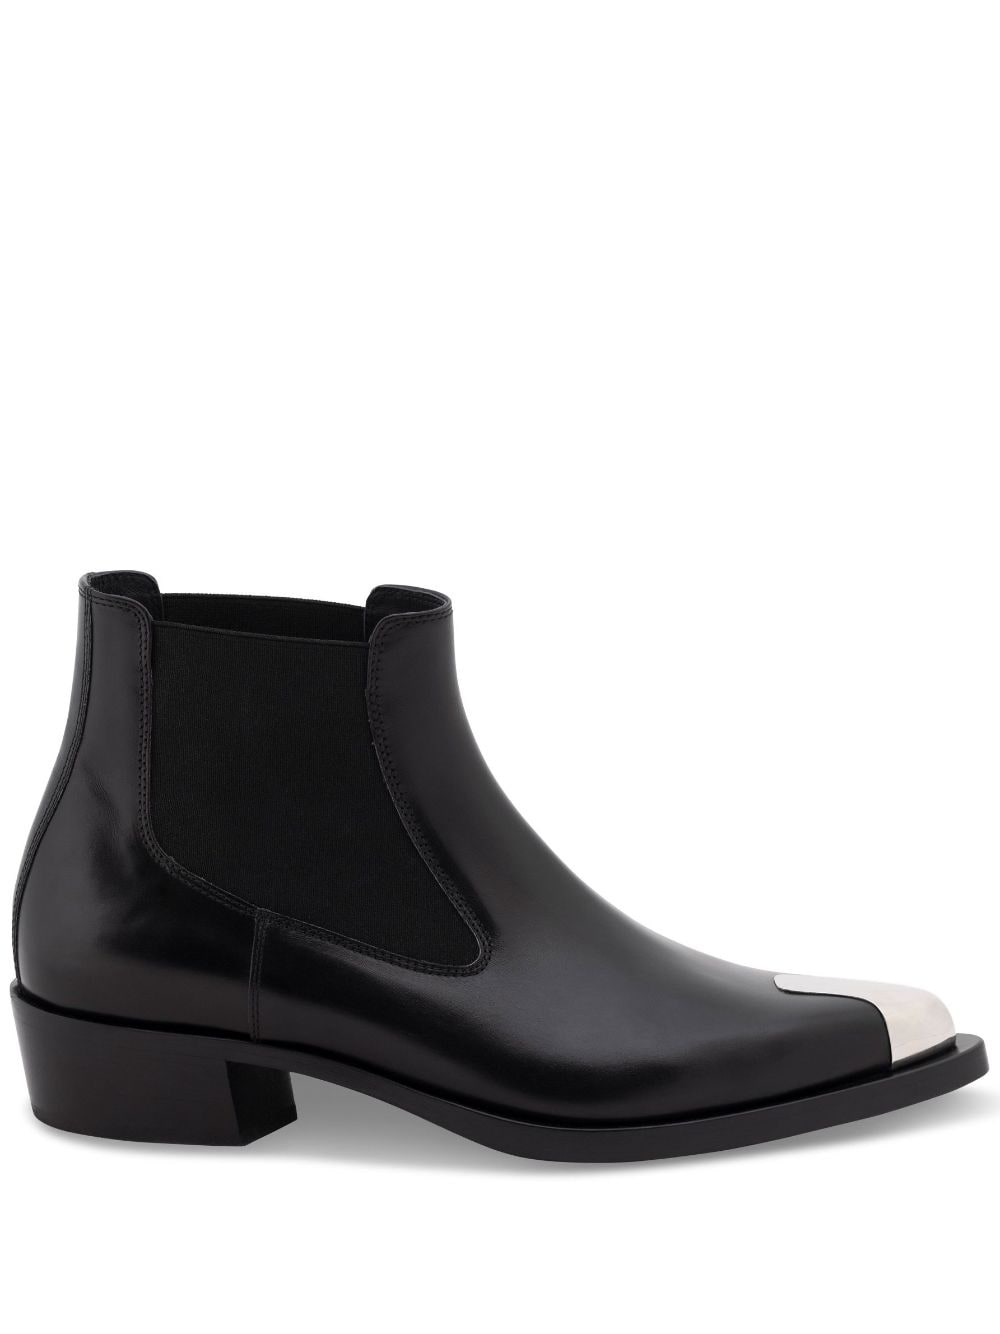 Shop Alexander Mcqueen Punk Chelsea Leather Boots For Men | Black Stretch Design With Silver-tone Hardware